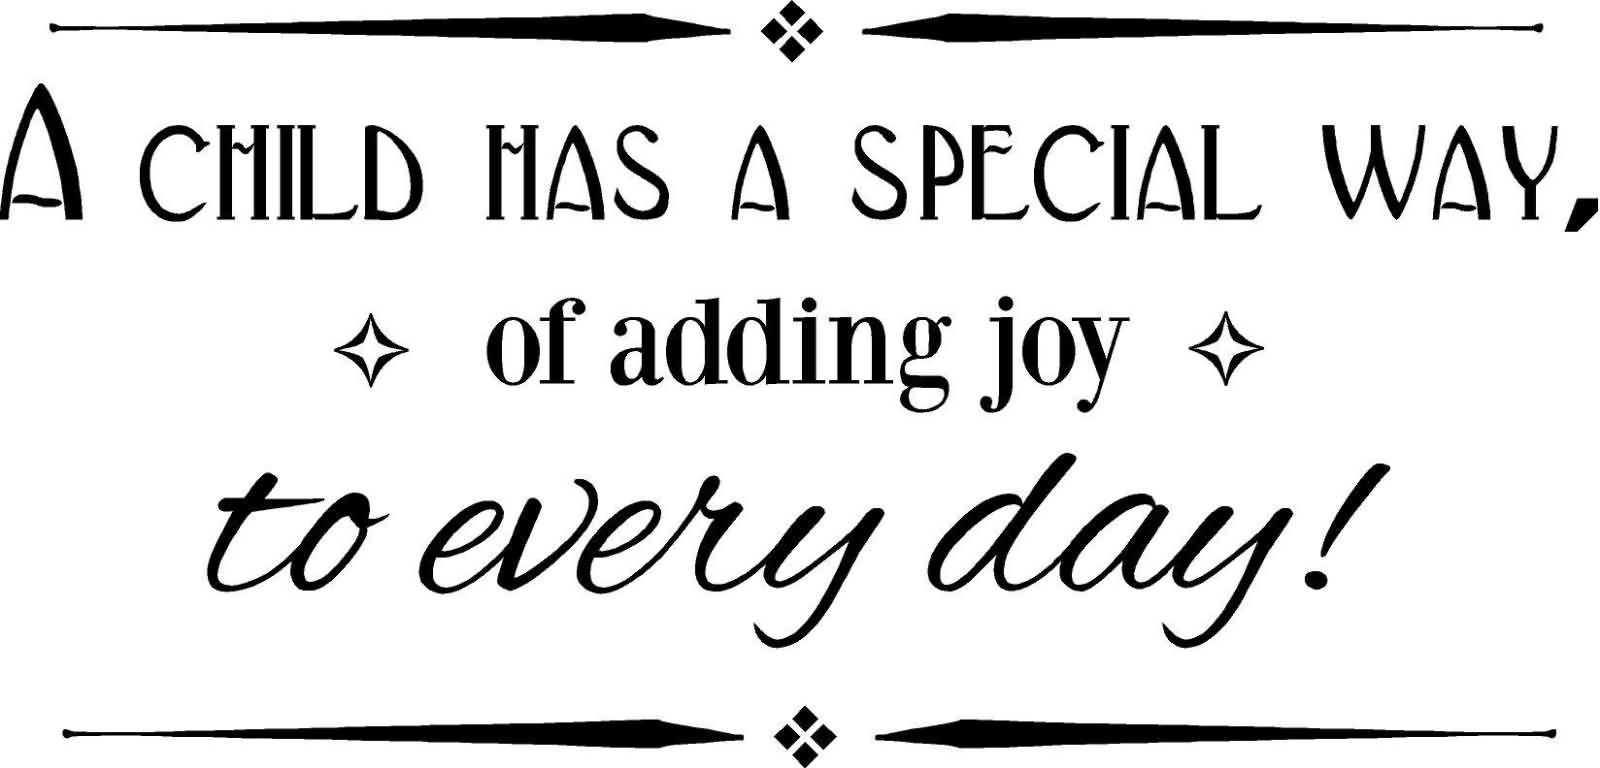 Quotes About Kids
 A child has a special way of adding joy to every day